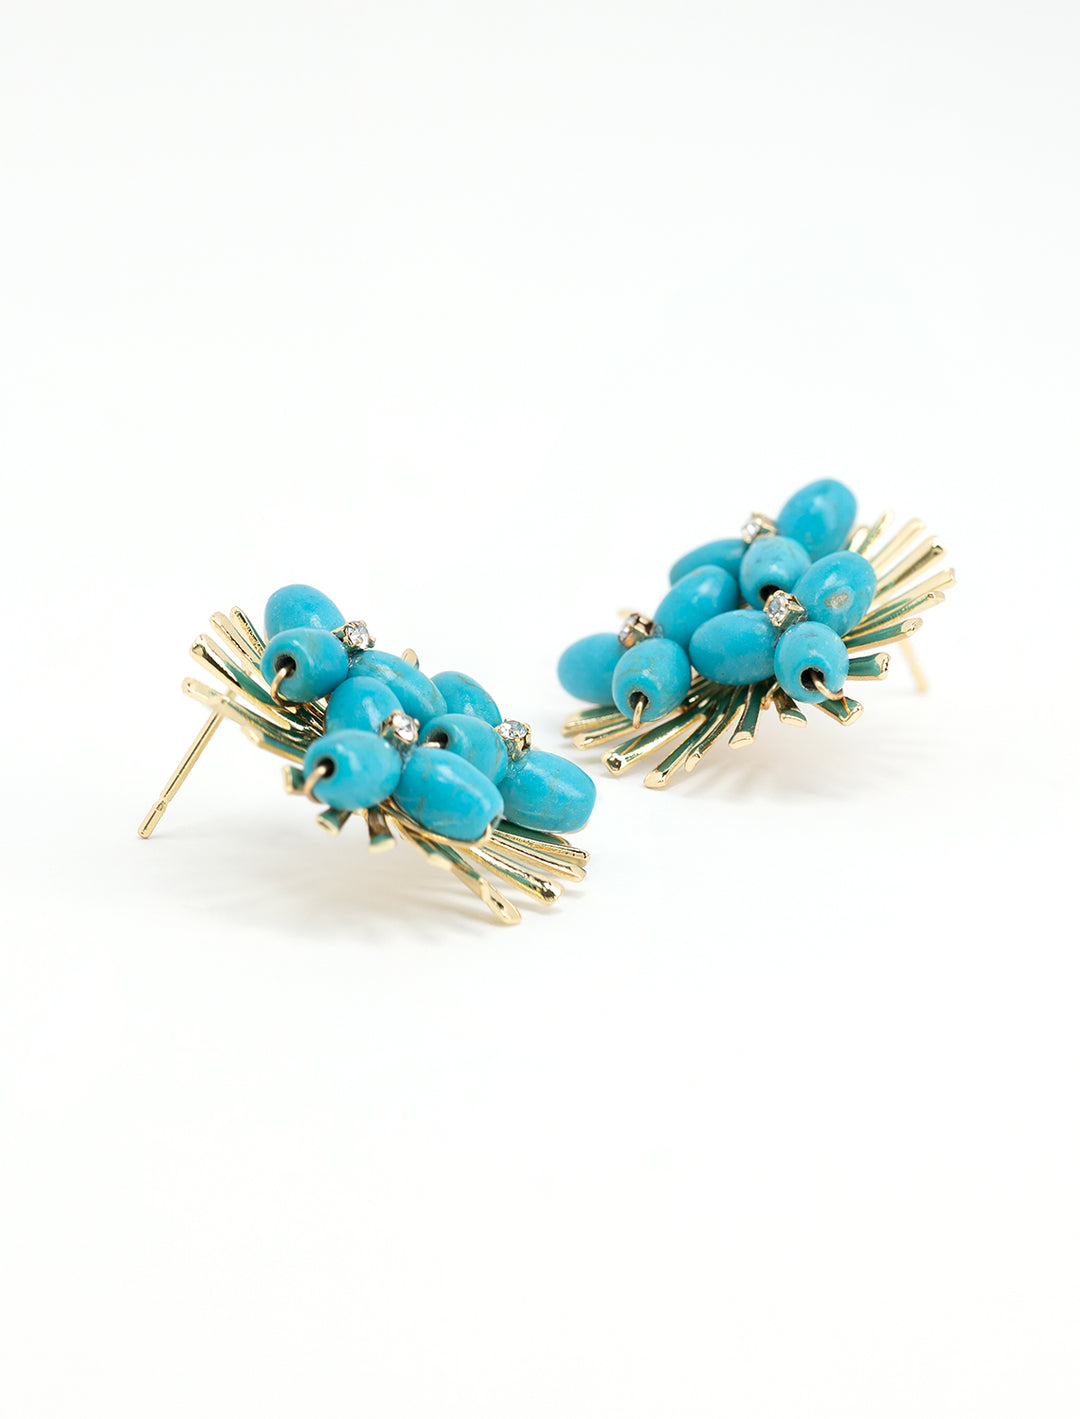 Close-up view of St. Armands' turquoise sunburst statement earring.